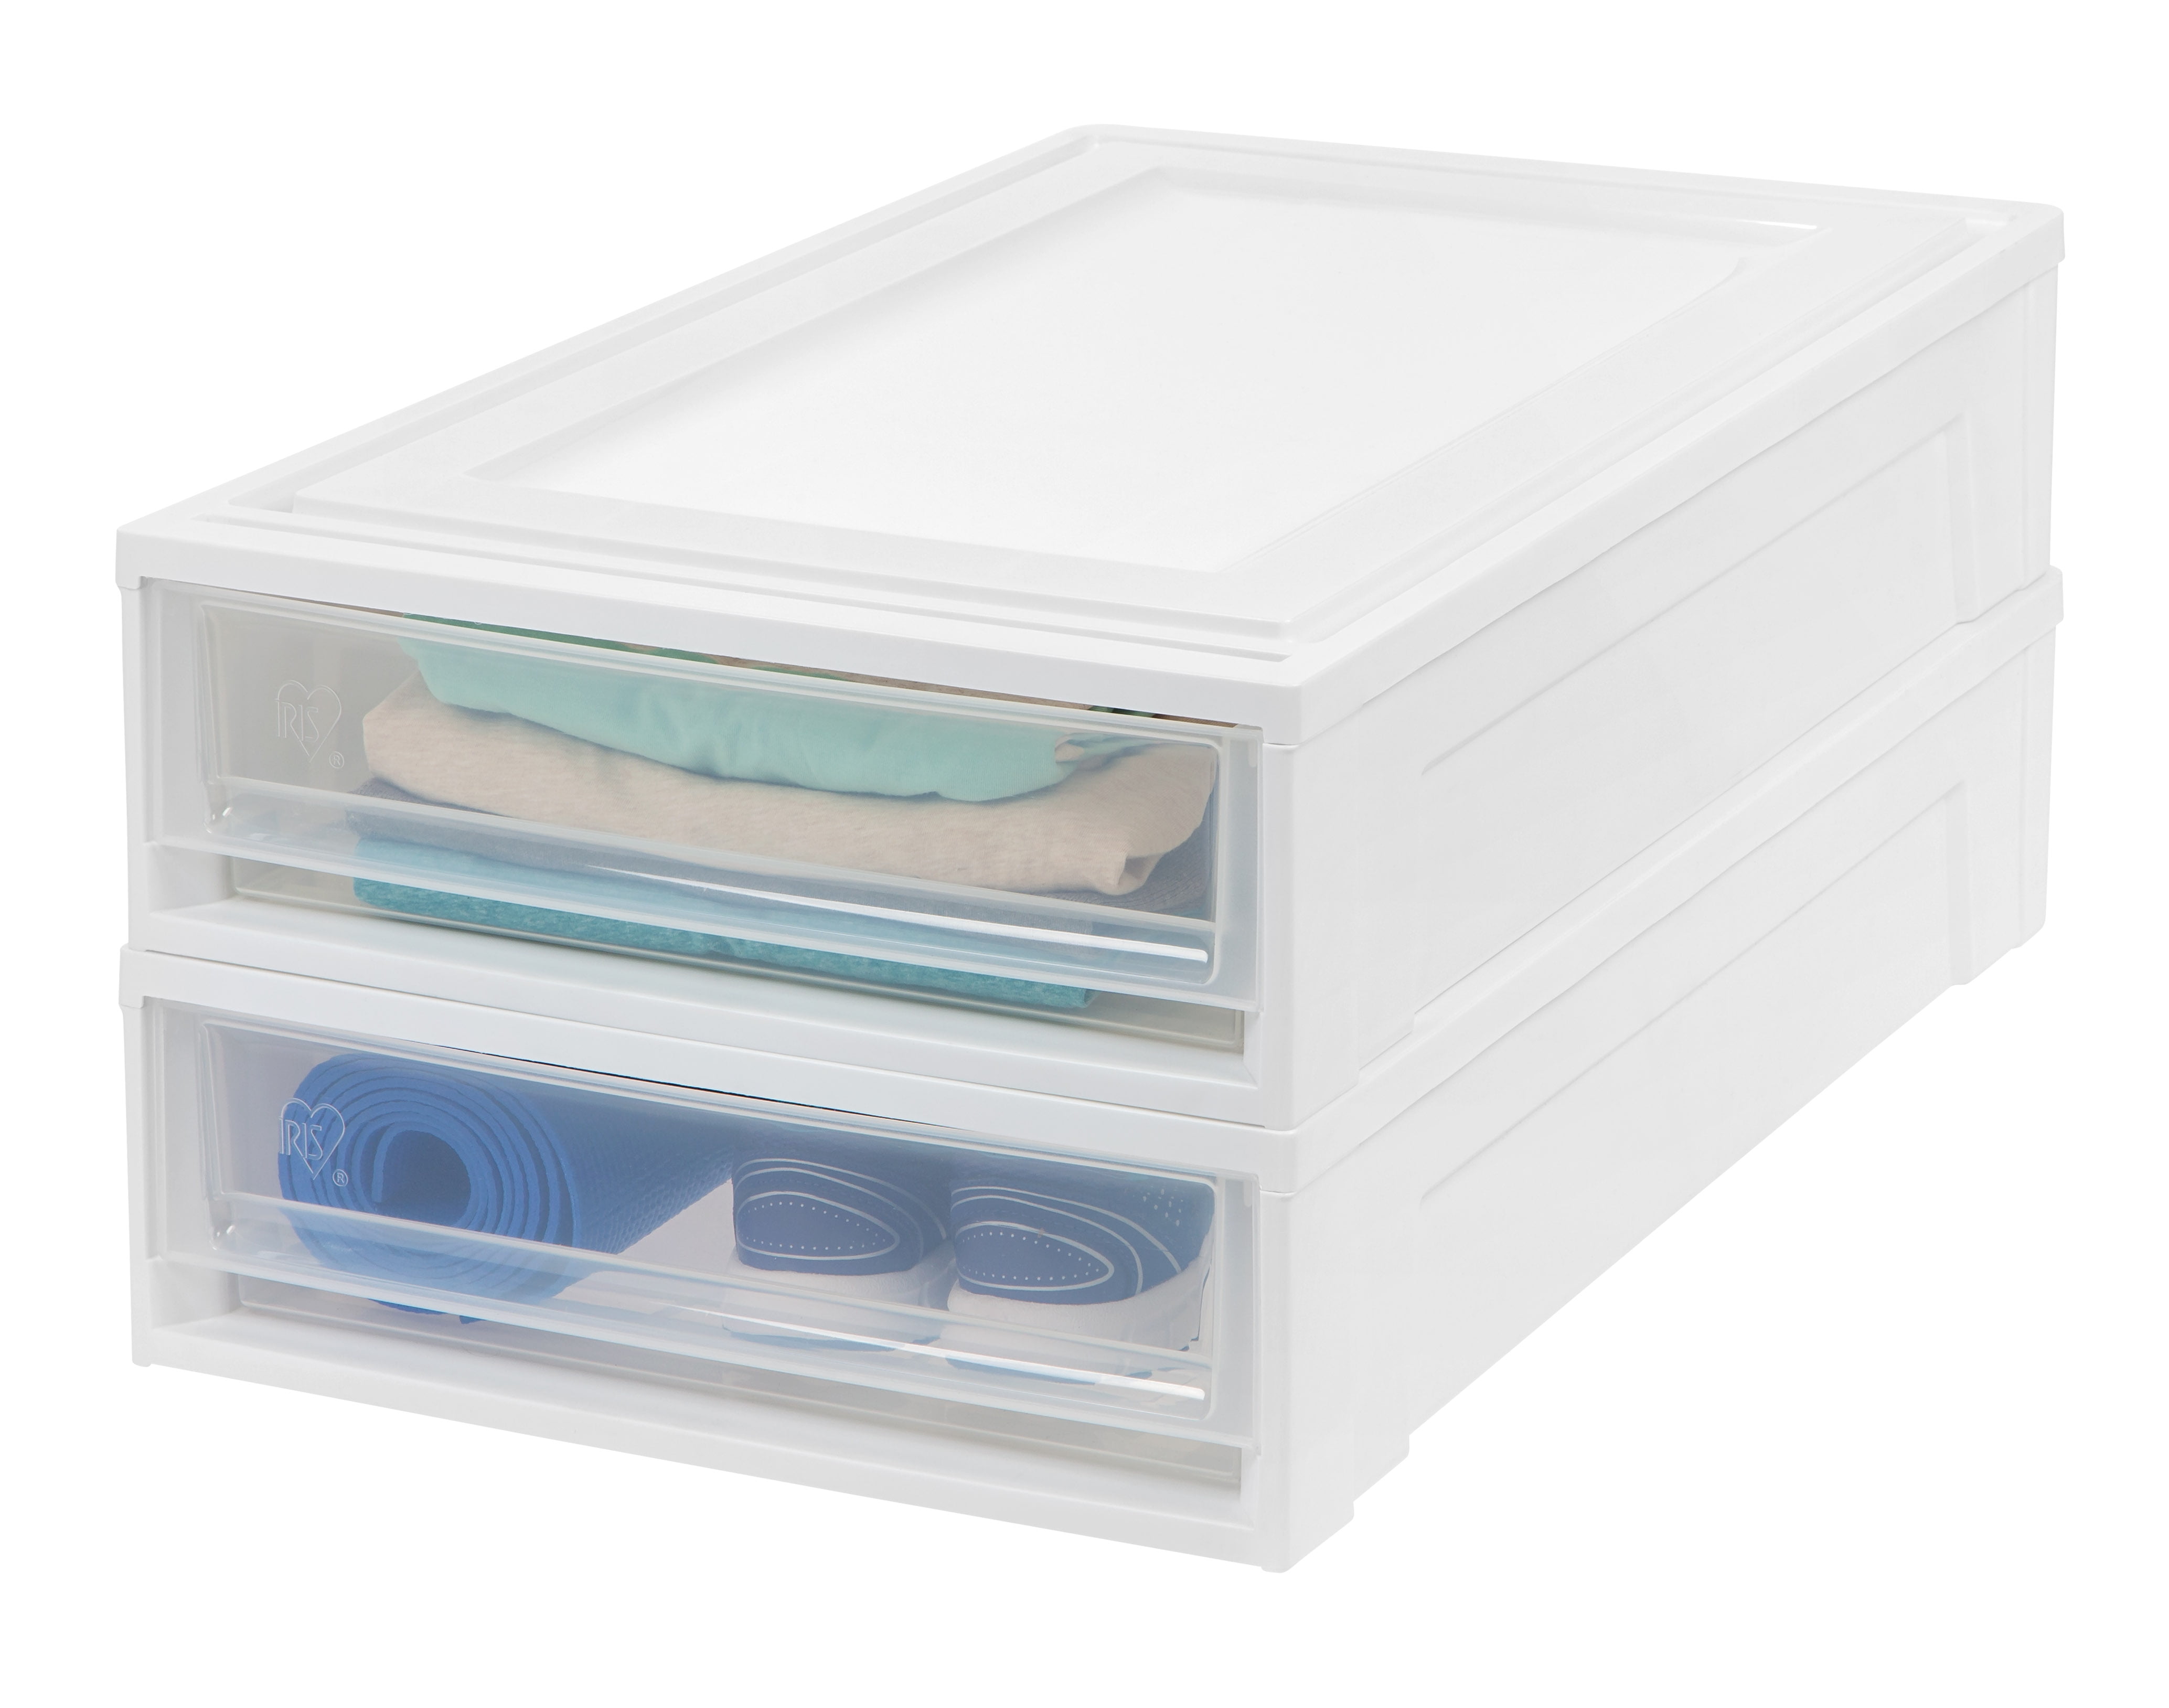 Iris Usa Plastic Under Bed Storage Containers : Target